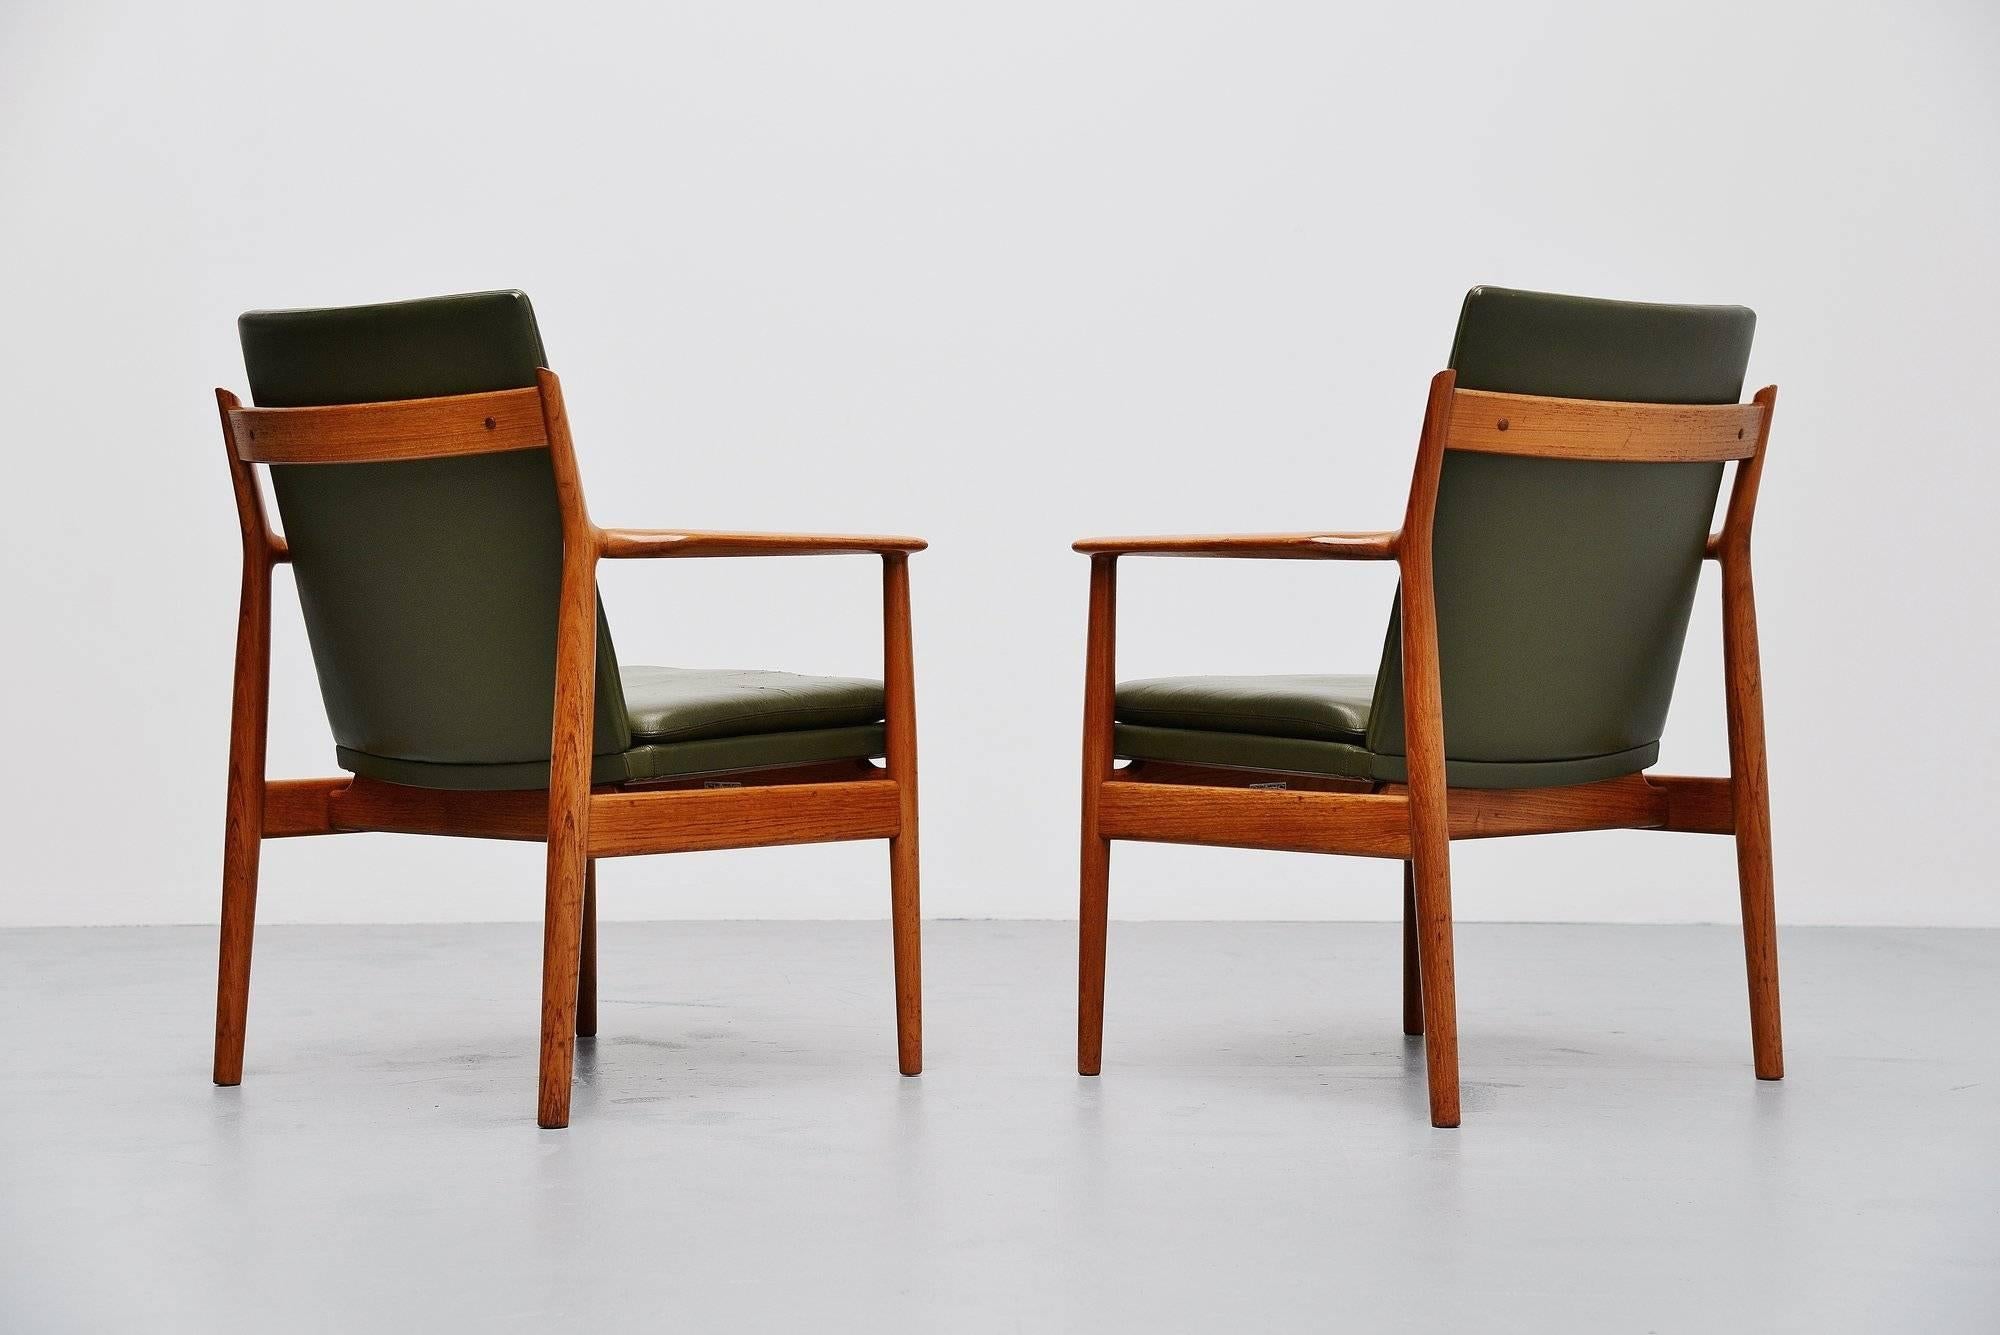 Nice pair of armchairs designed by Arne Vodder and manufactured by Sibast Mobler, Denmark, 1960. The chairs have a solid teak frame and green leather upholstery. The upholstery is still original but the seating cushions have new foam inside. The